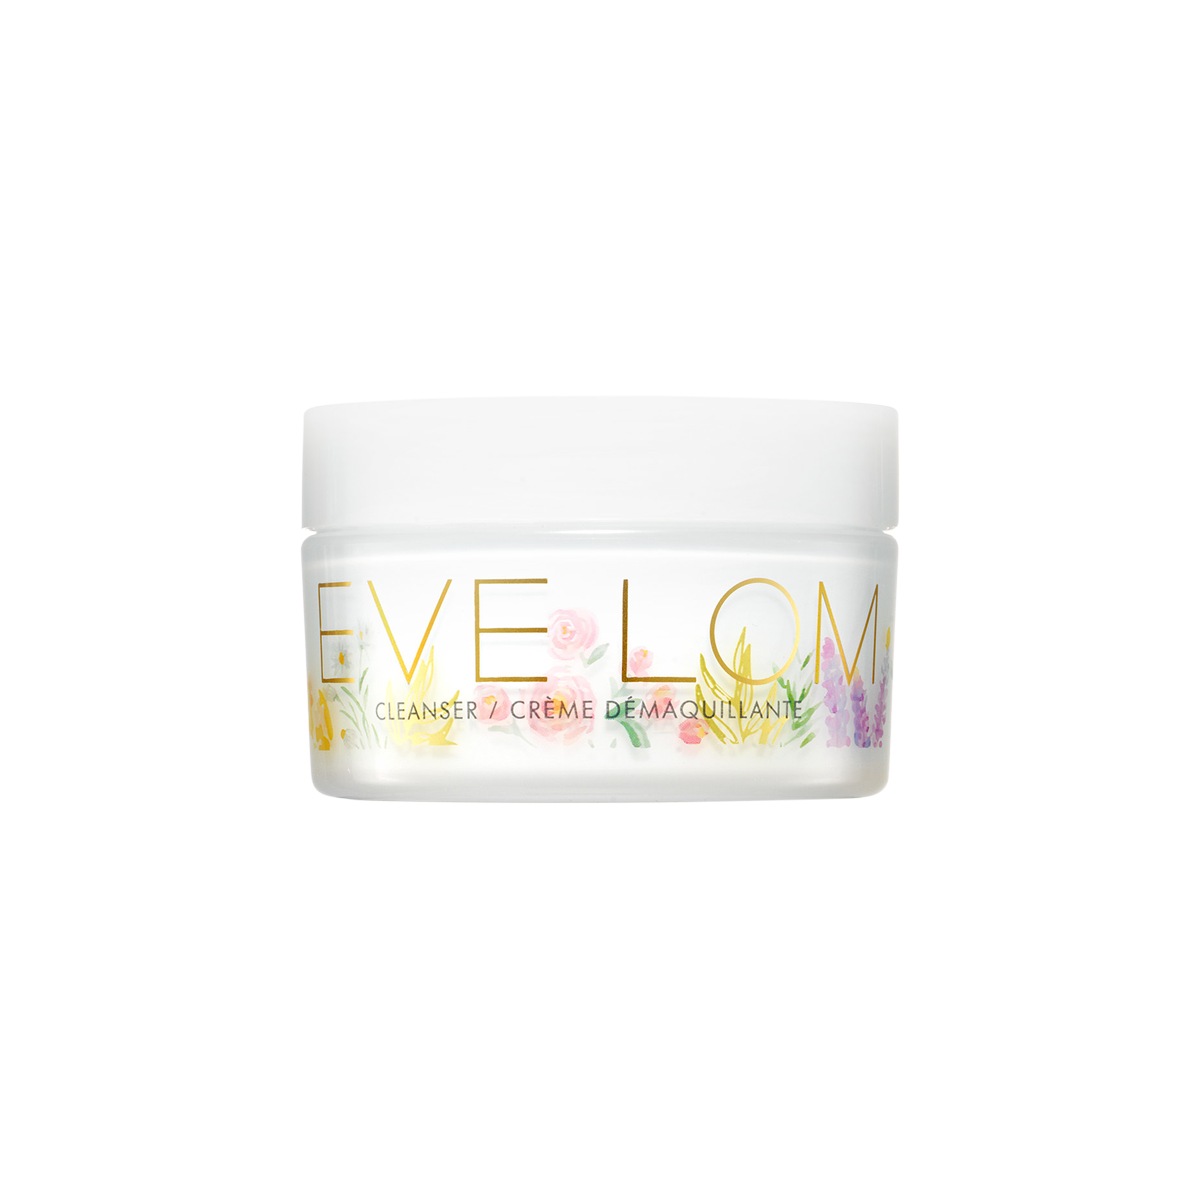 Eve Lom - Cleanser Limited Edition